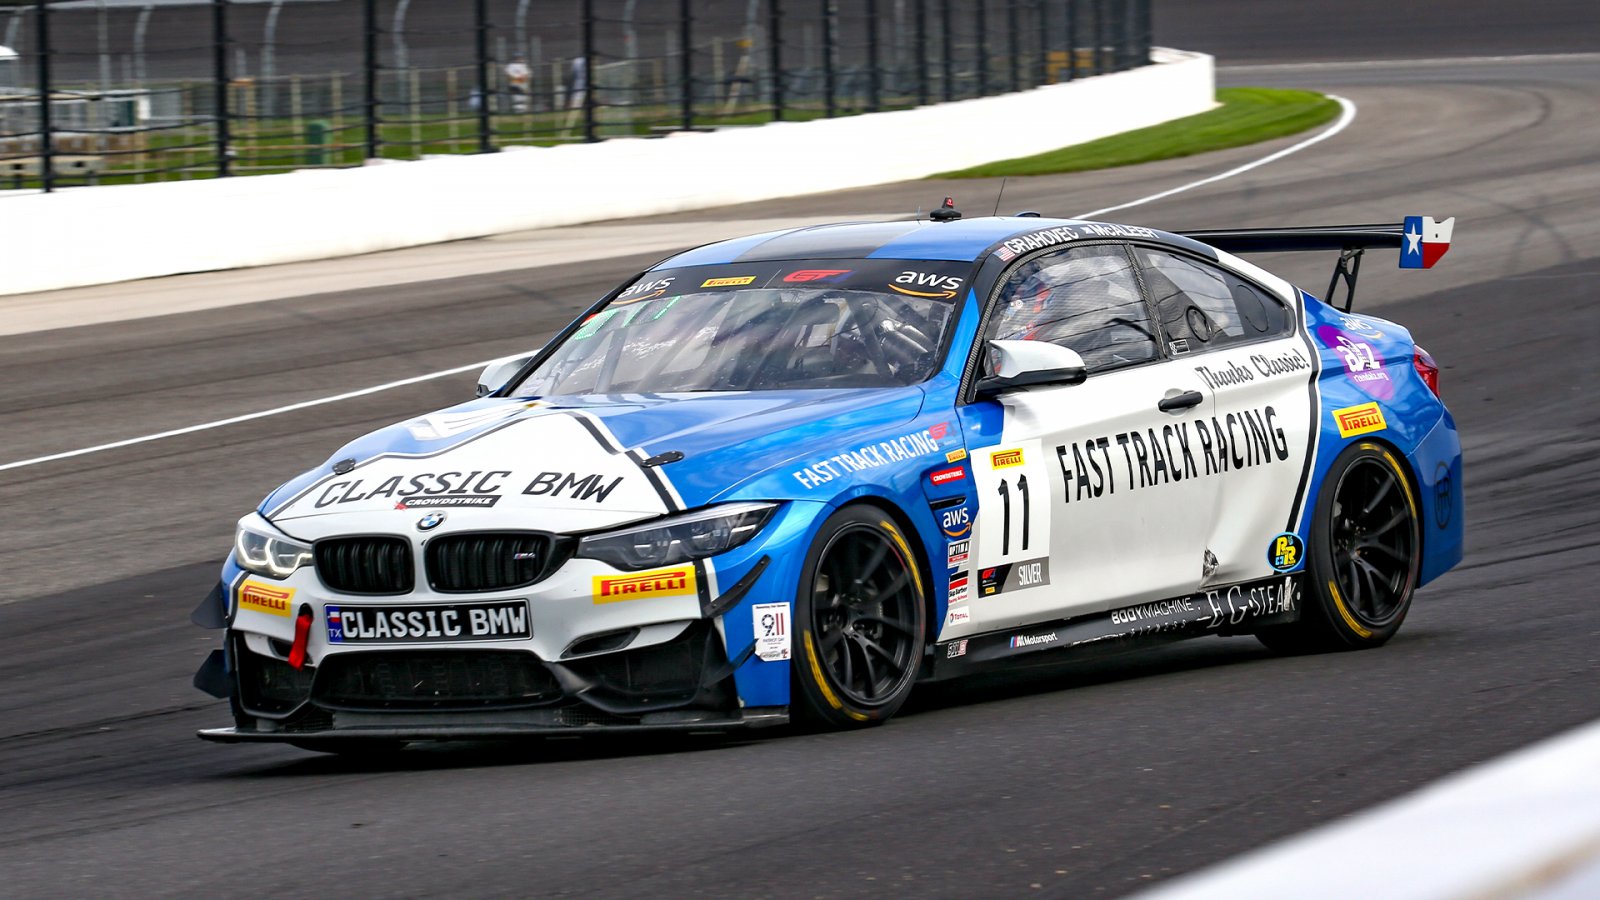 Checkered Flag for Classic BMW & Their Long Dedication to Racing! Fast Track Racing Takes Two BMW M4 GT4 Sports Cars to Indy This Weekend for Pirelli GT4 America & IGTC 8-Hour Contests